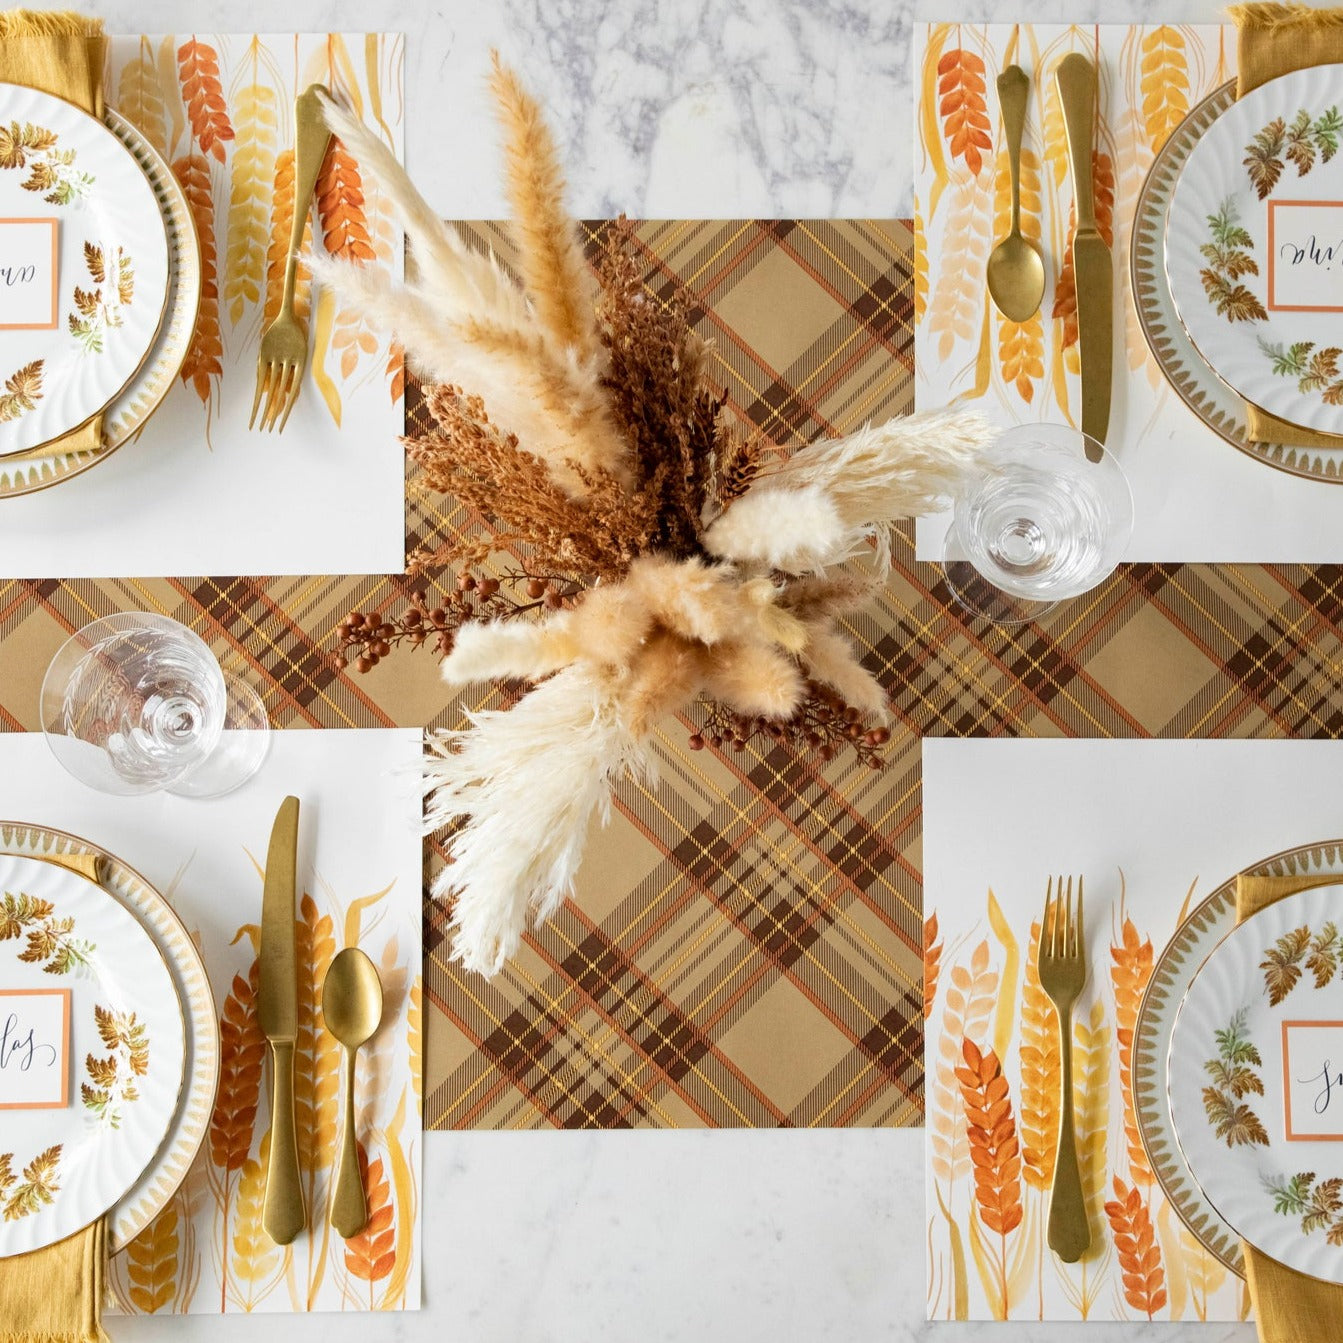 Thanksgiving table setting with the Hester &amp; Cook Autumn Plaid Runner, gold and brown plates, and silverware, featuring autumn colors.